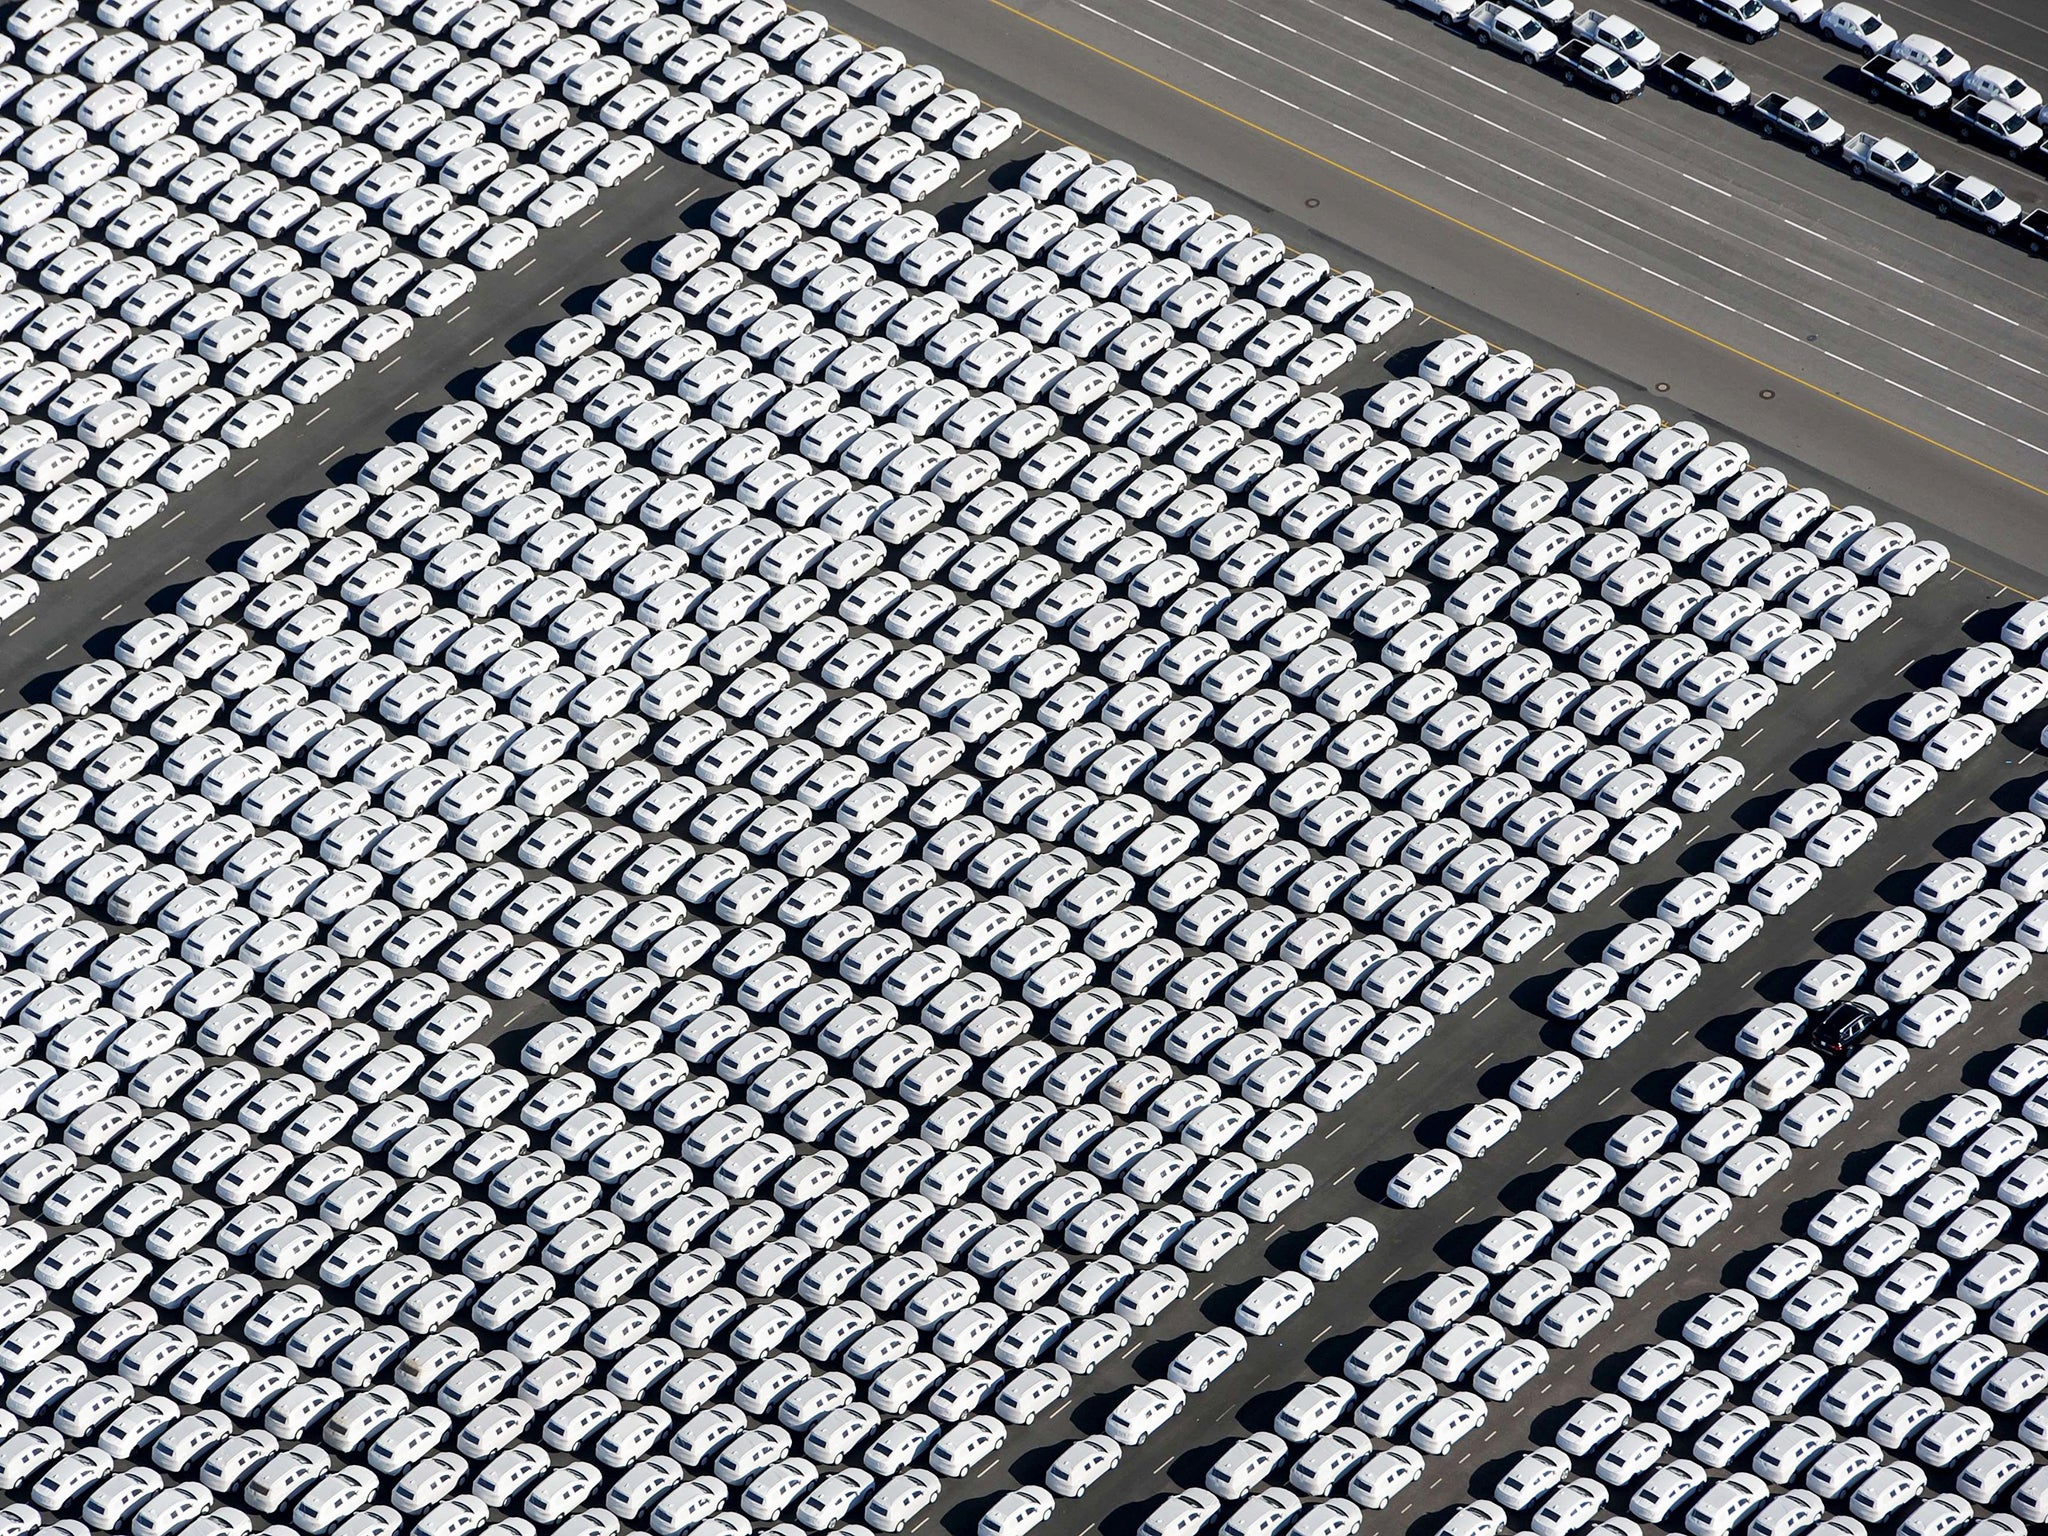 New cars of German car maker Volkswagen (VW) stand ready for shipping next to the Volkswagen plant in Emden, northwestern Germany. Volkswagen, the world's biggest carmaker by sales, has admitted that up to 11 million diesel cars worldwide are fitted with devices that can switch on pollution controls when they detect the car is undergoing testing